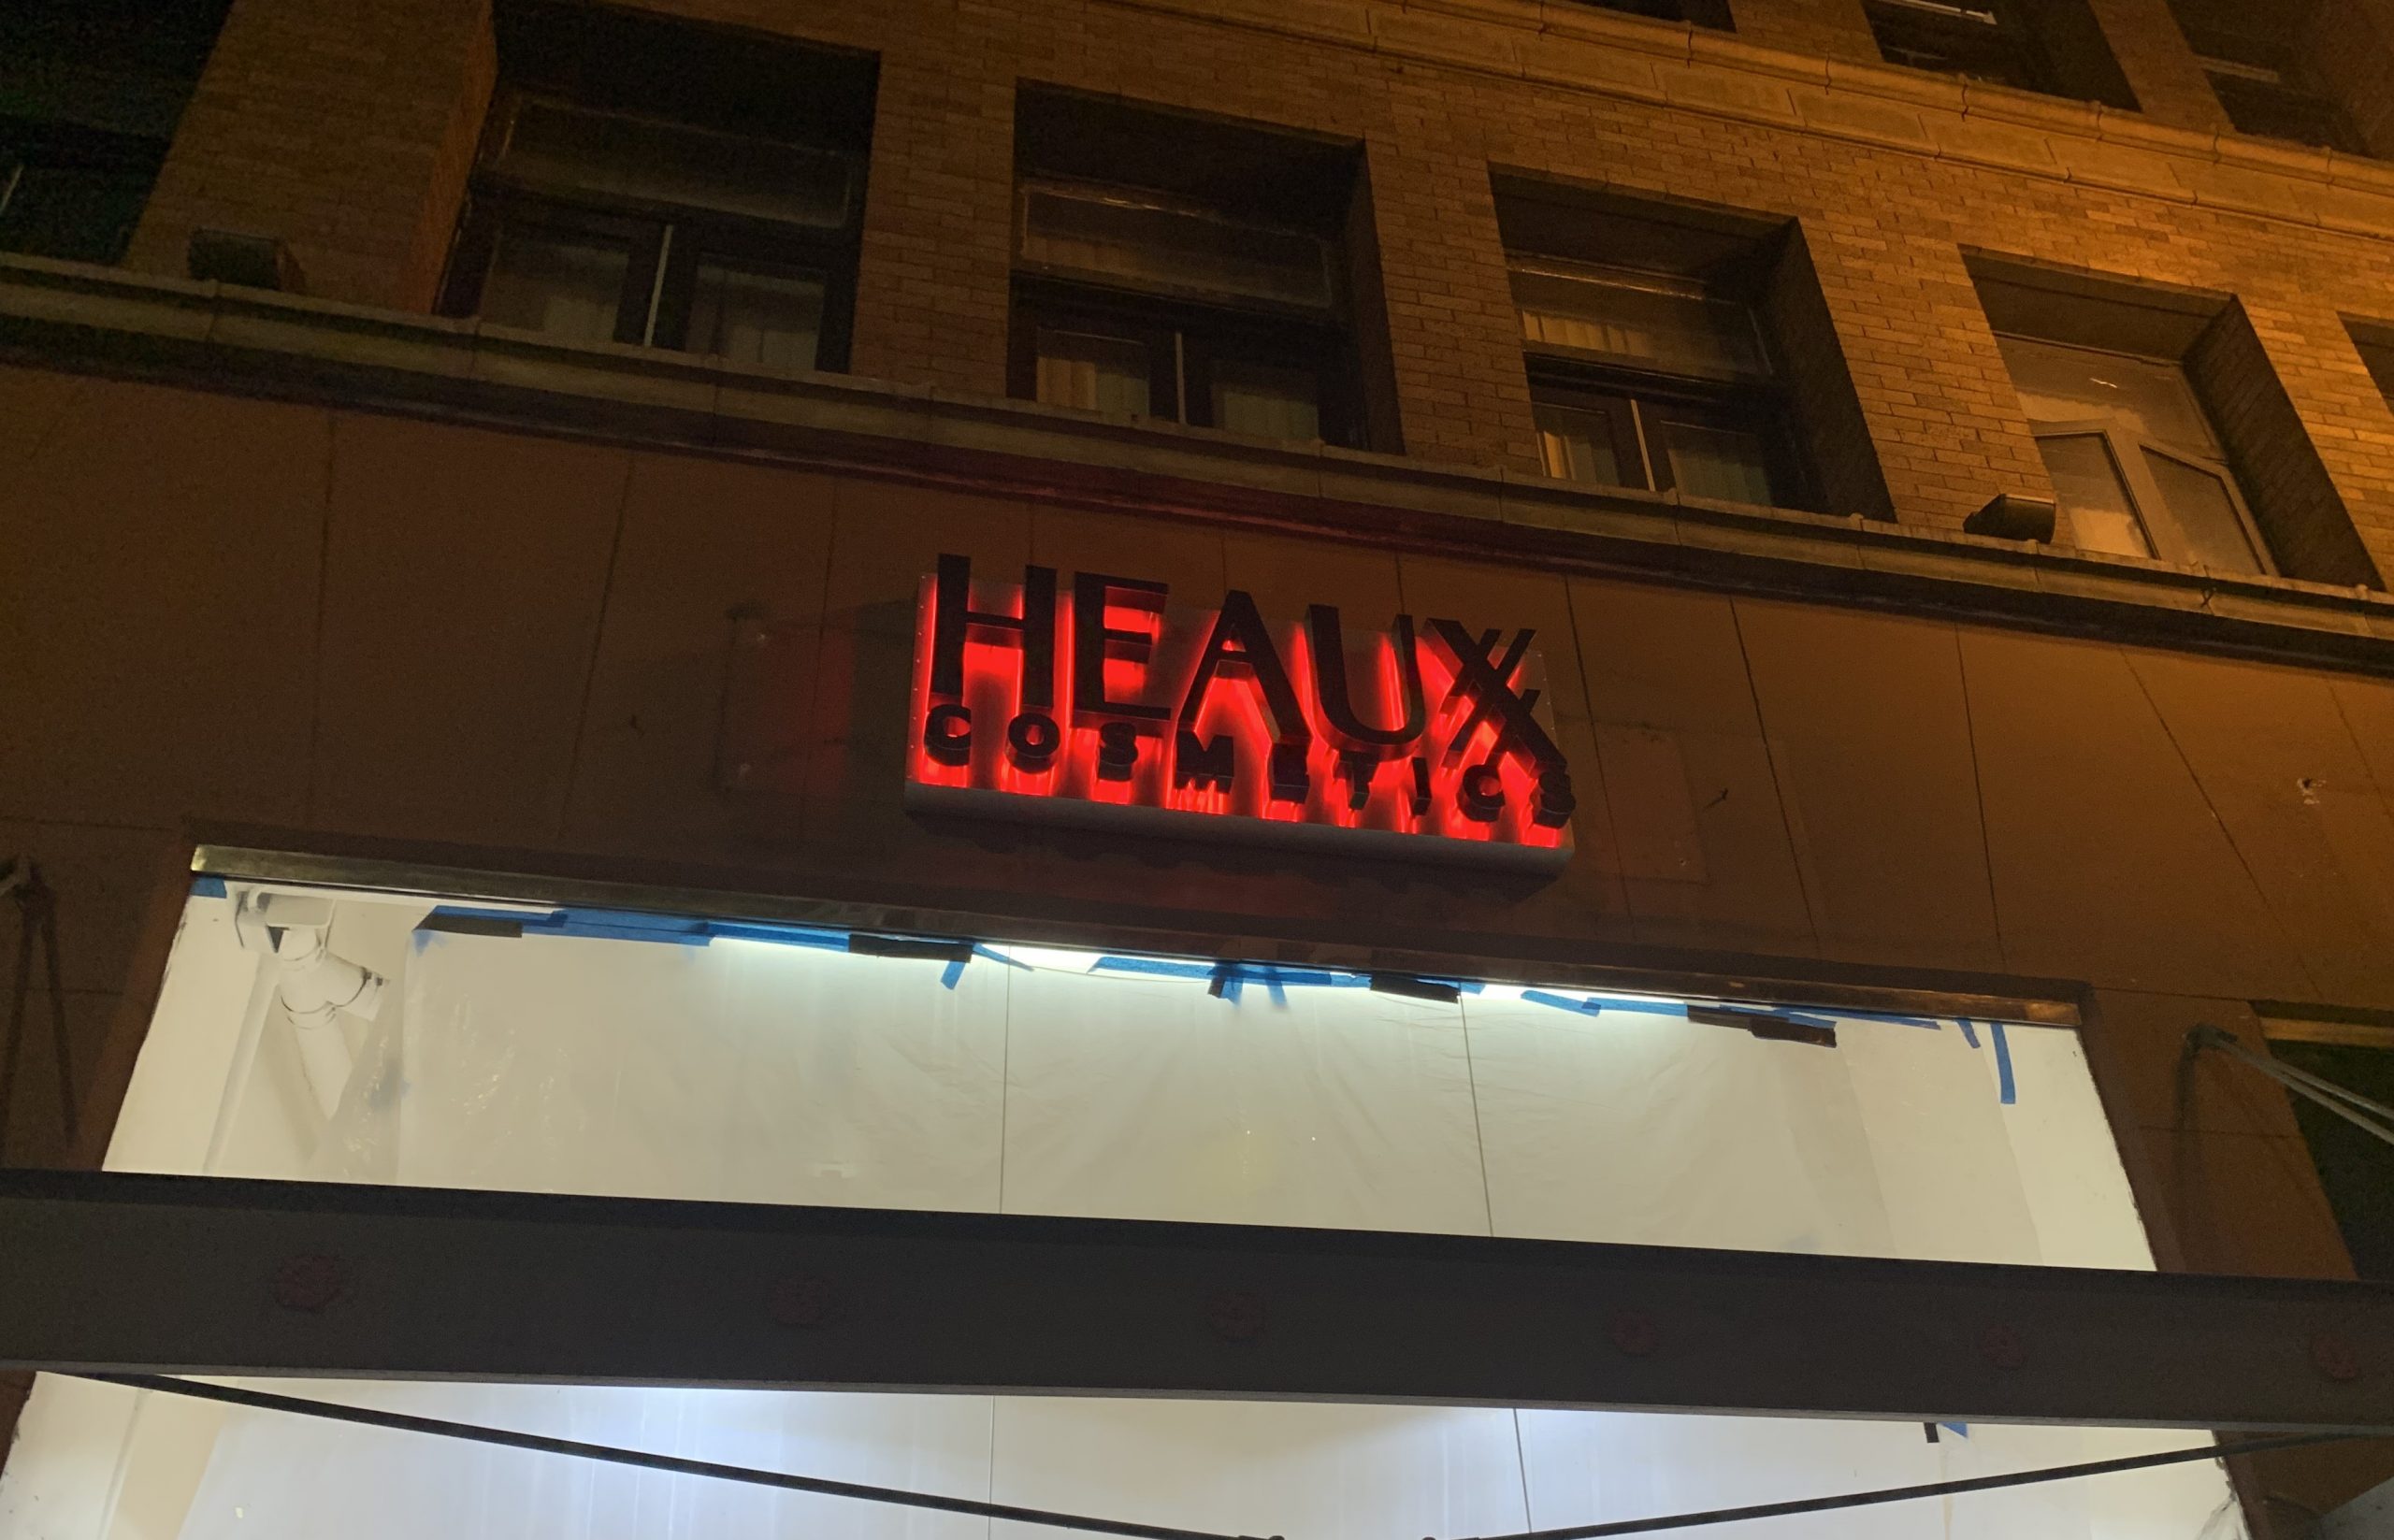 These are the backlit channel letters with red led lighting we made for Heaux Cosmetics. Now the Los Angeles makeup company has an eye-catching sign befitting their brand identity.